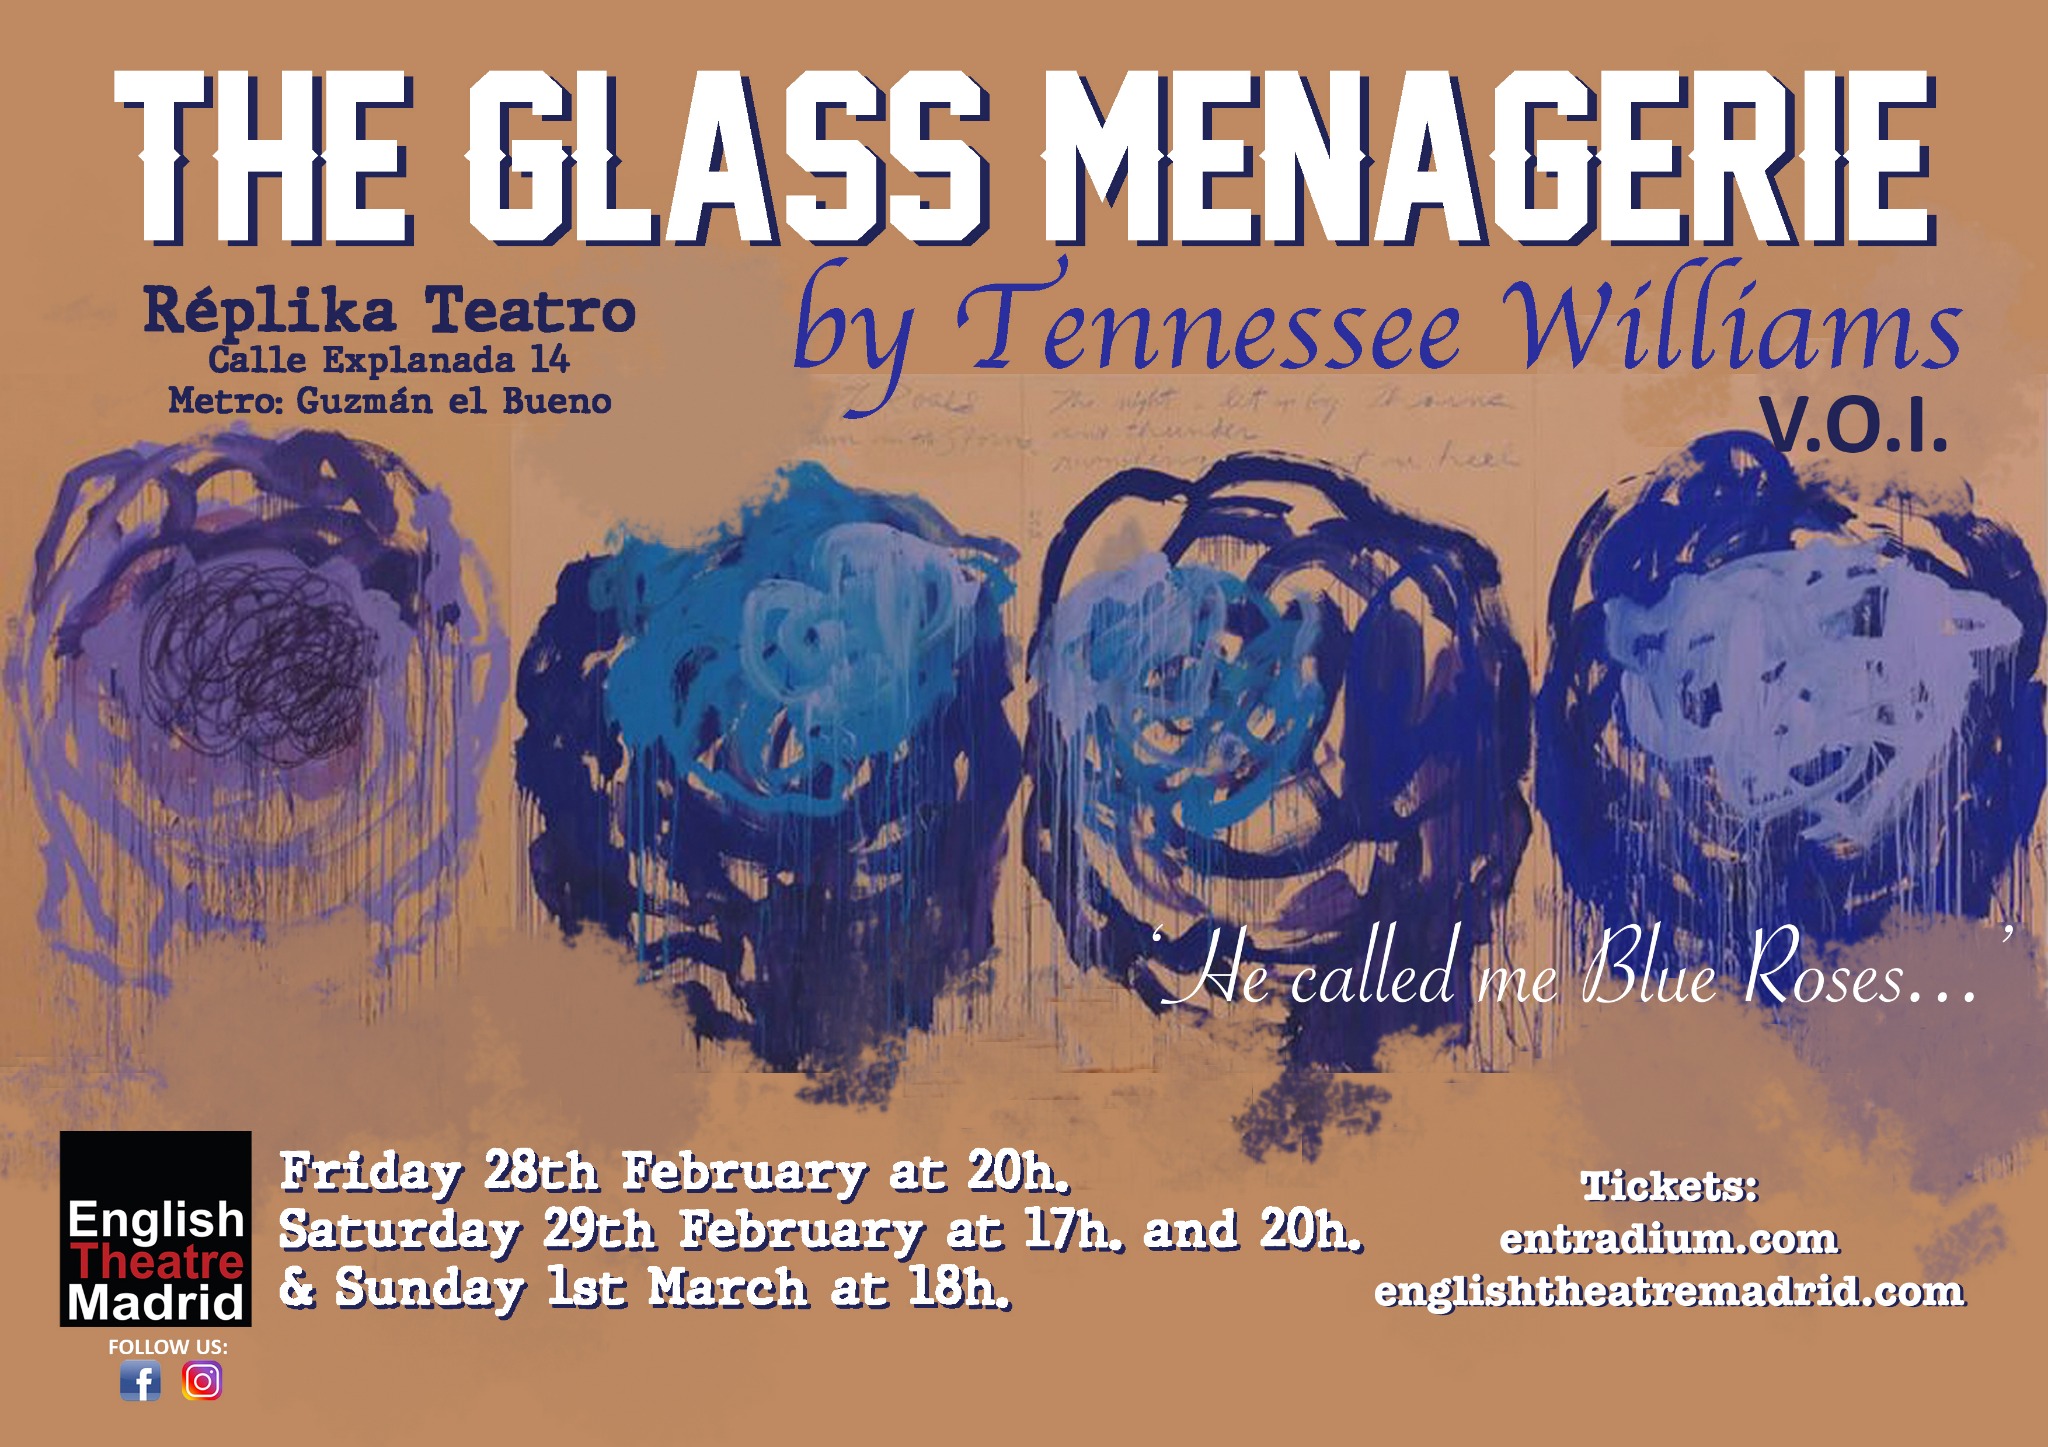 The glass menagerie poster